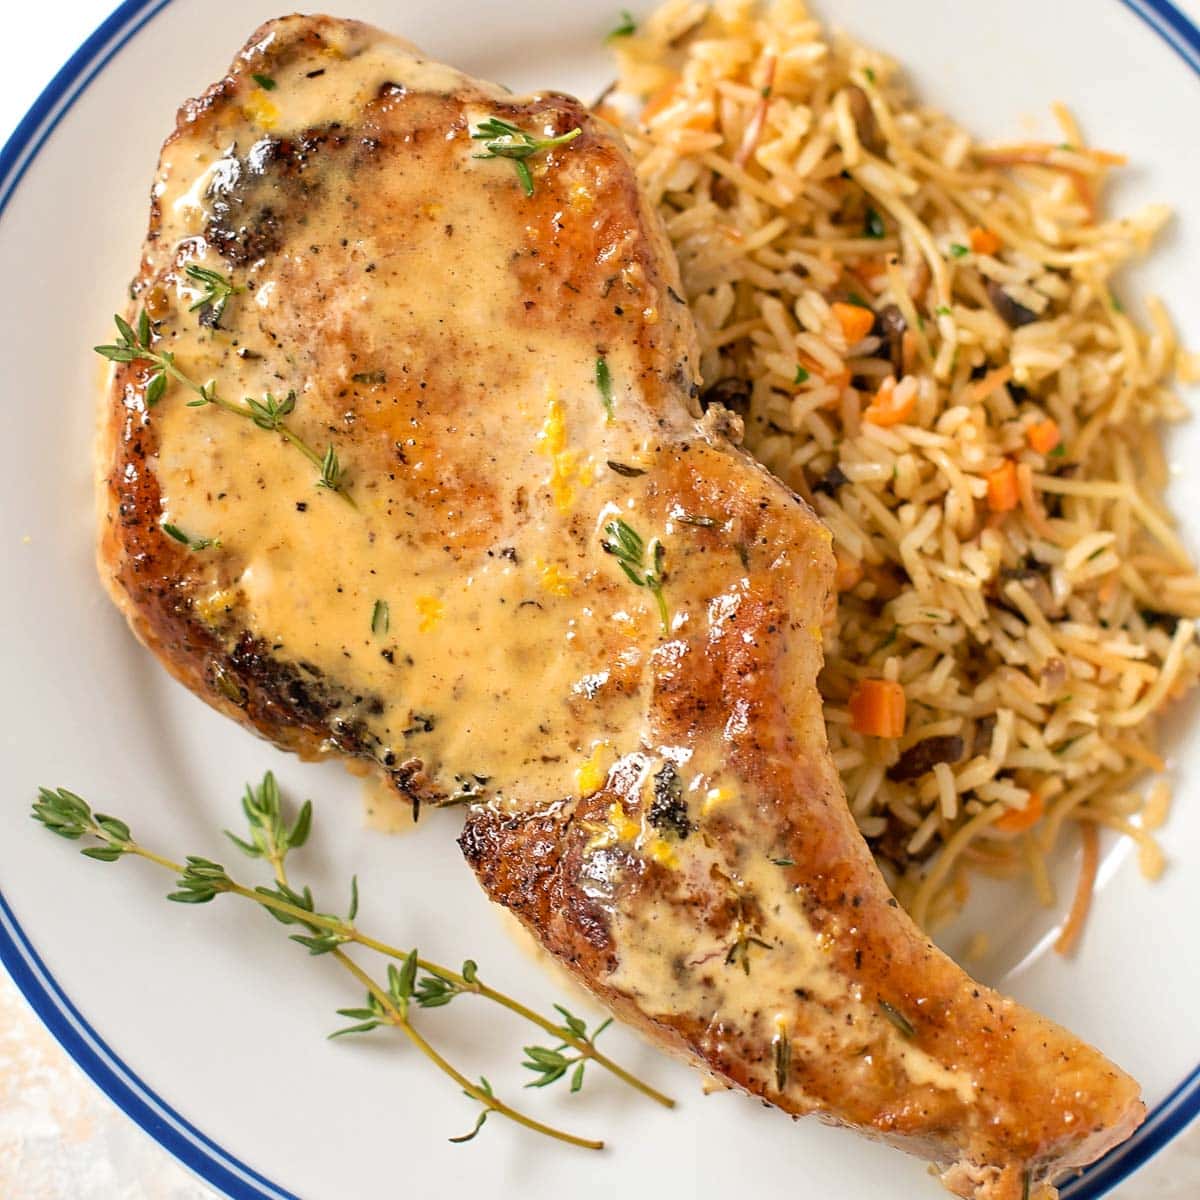 Smothered pork chop served on a plate with rice